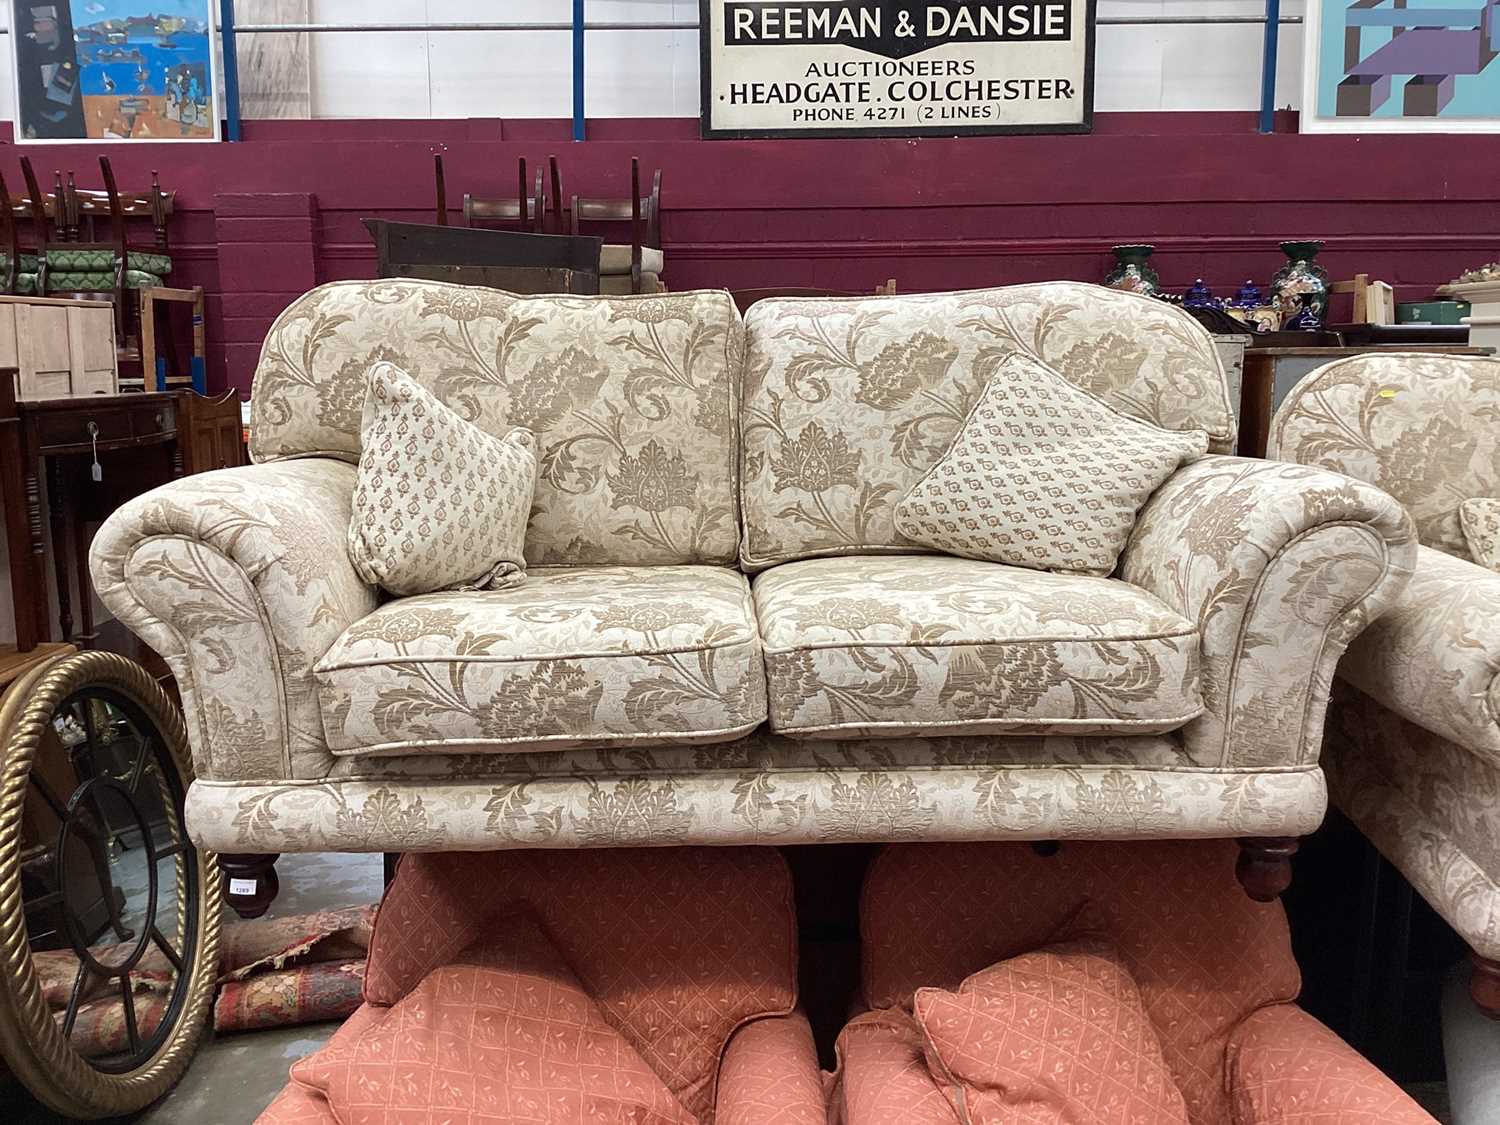 Good quality contemporary three piece suite with floral cream upholstery, comprising pair of two sea